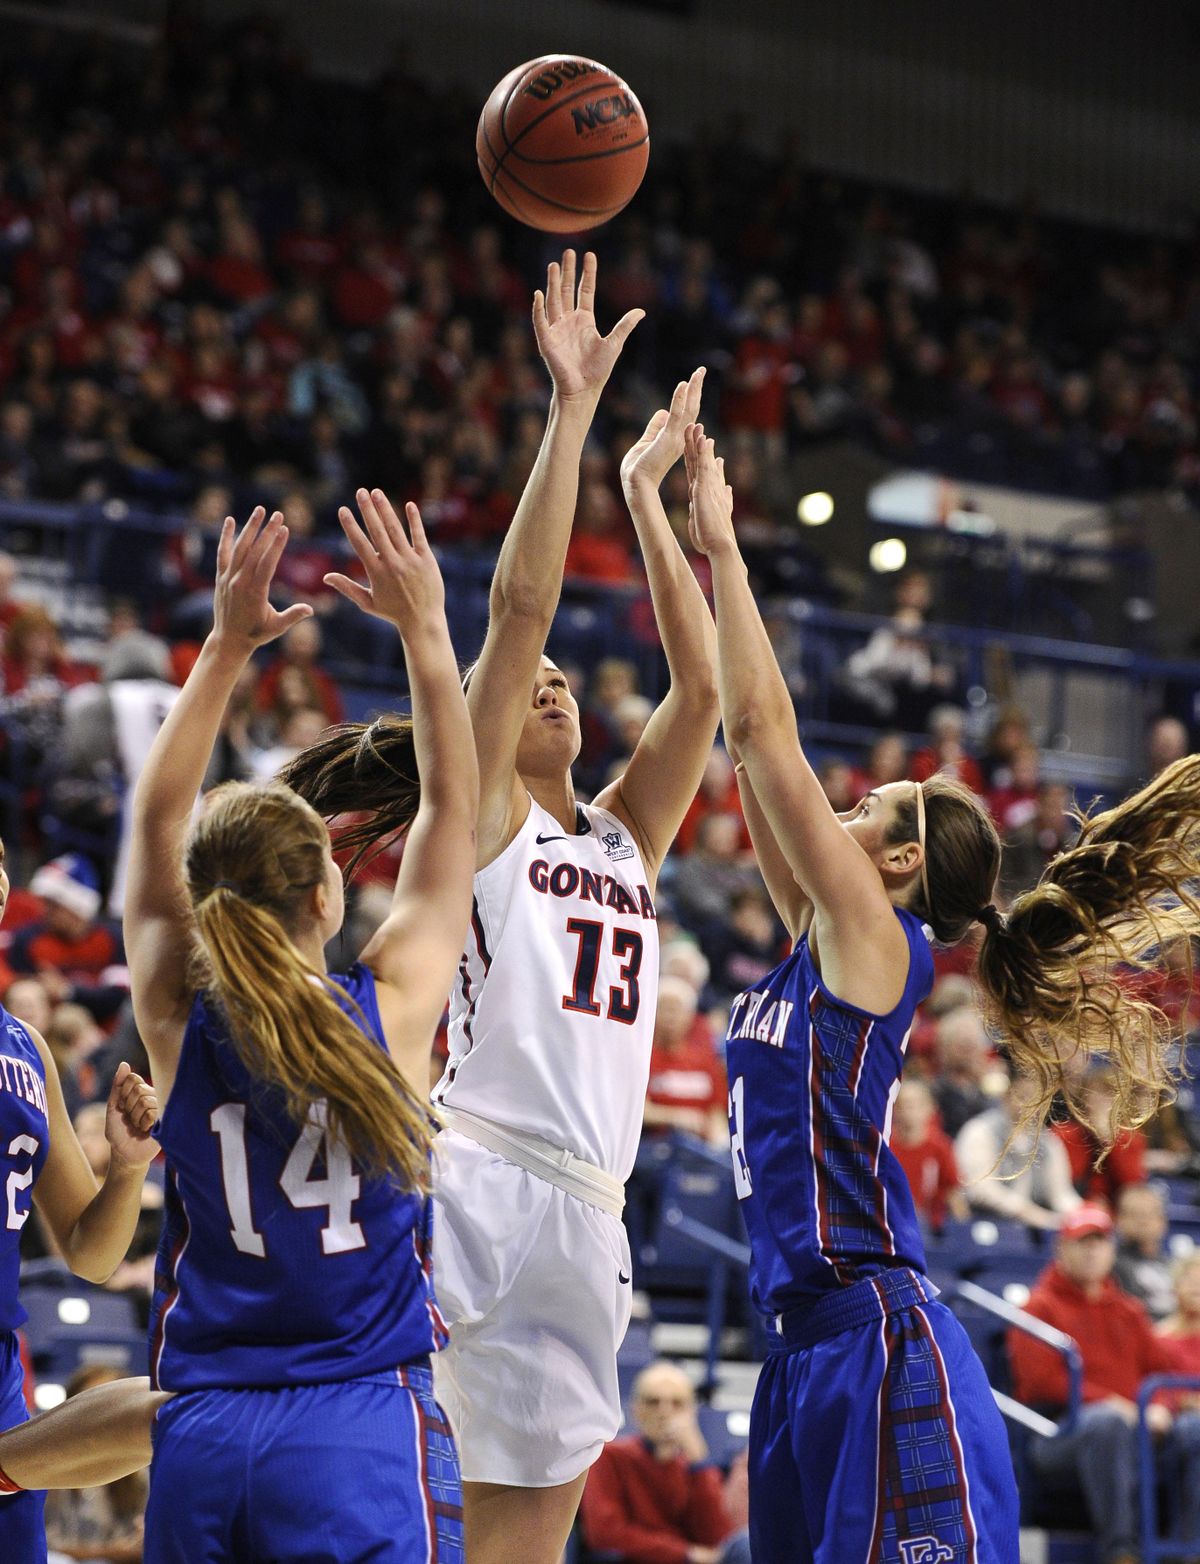 Gonzaga Bulldogs forward Jill Barta (13) goes up for a basket against Presbyterian Blue Hose guard Janie Miles (14) during an NCAA women’s college basketball game on Saturday, Dec. 3, 2016 at McCarthey Athletic Center in Spokane. (James Snook / Special to The Spokesman-Review)